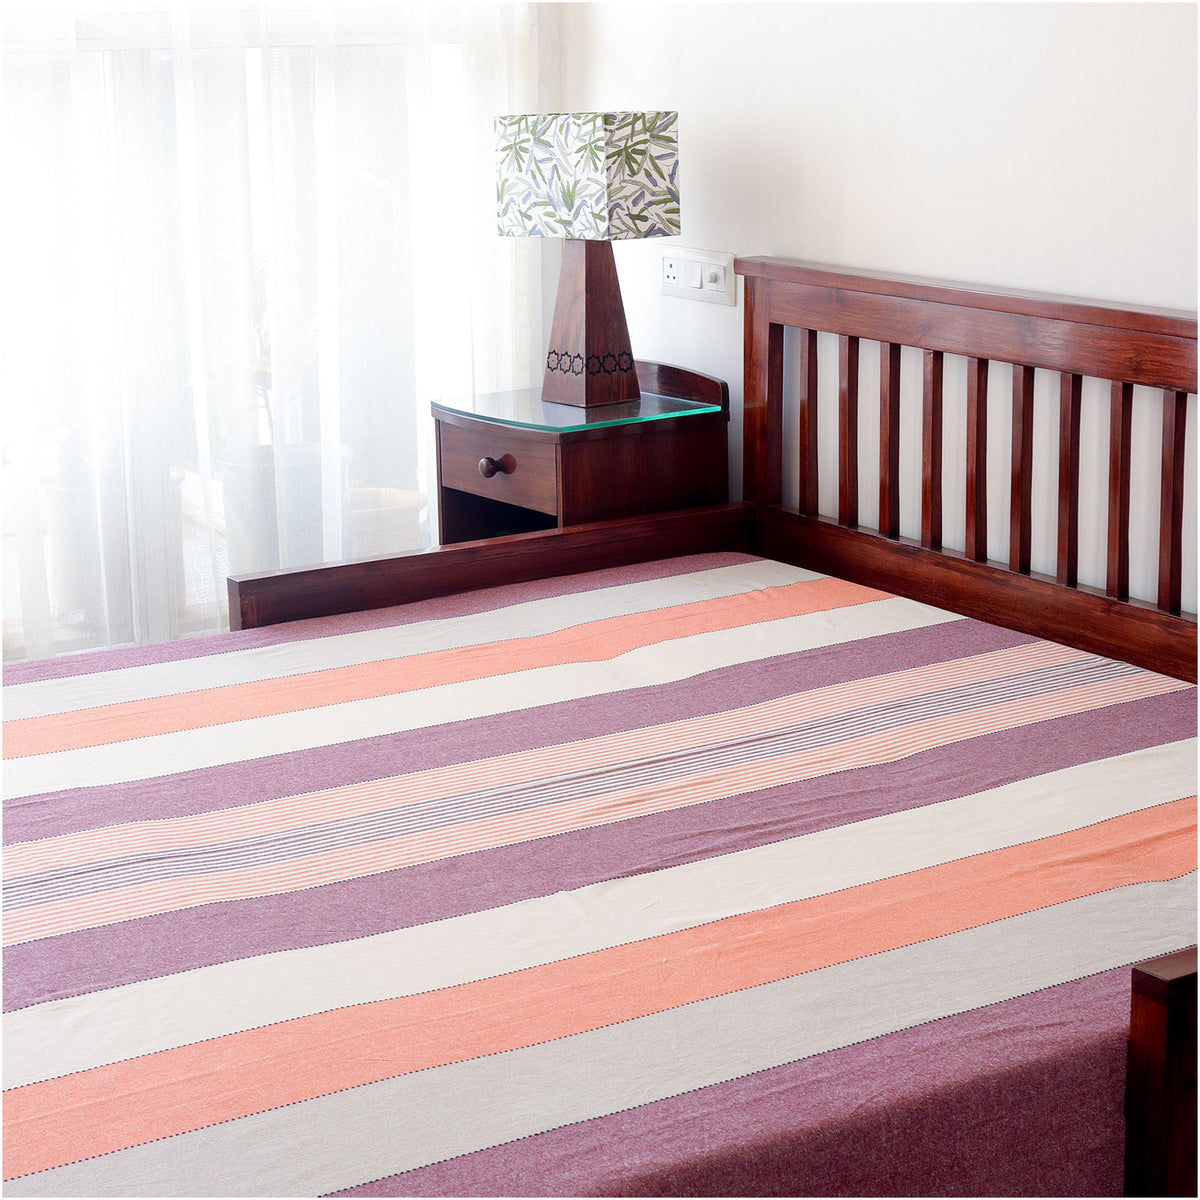 Handloom Cotton Bed Cover - 90x108